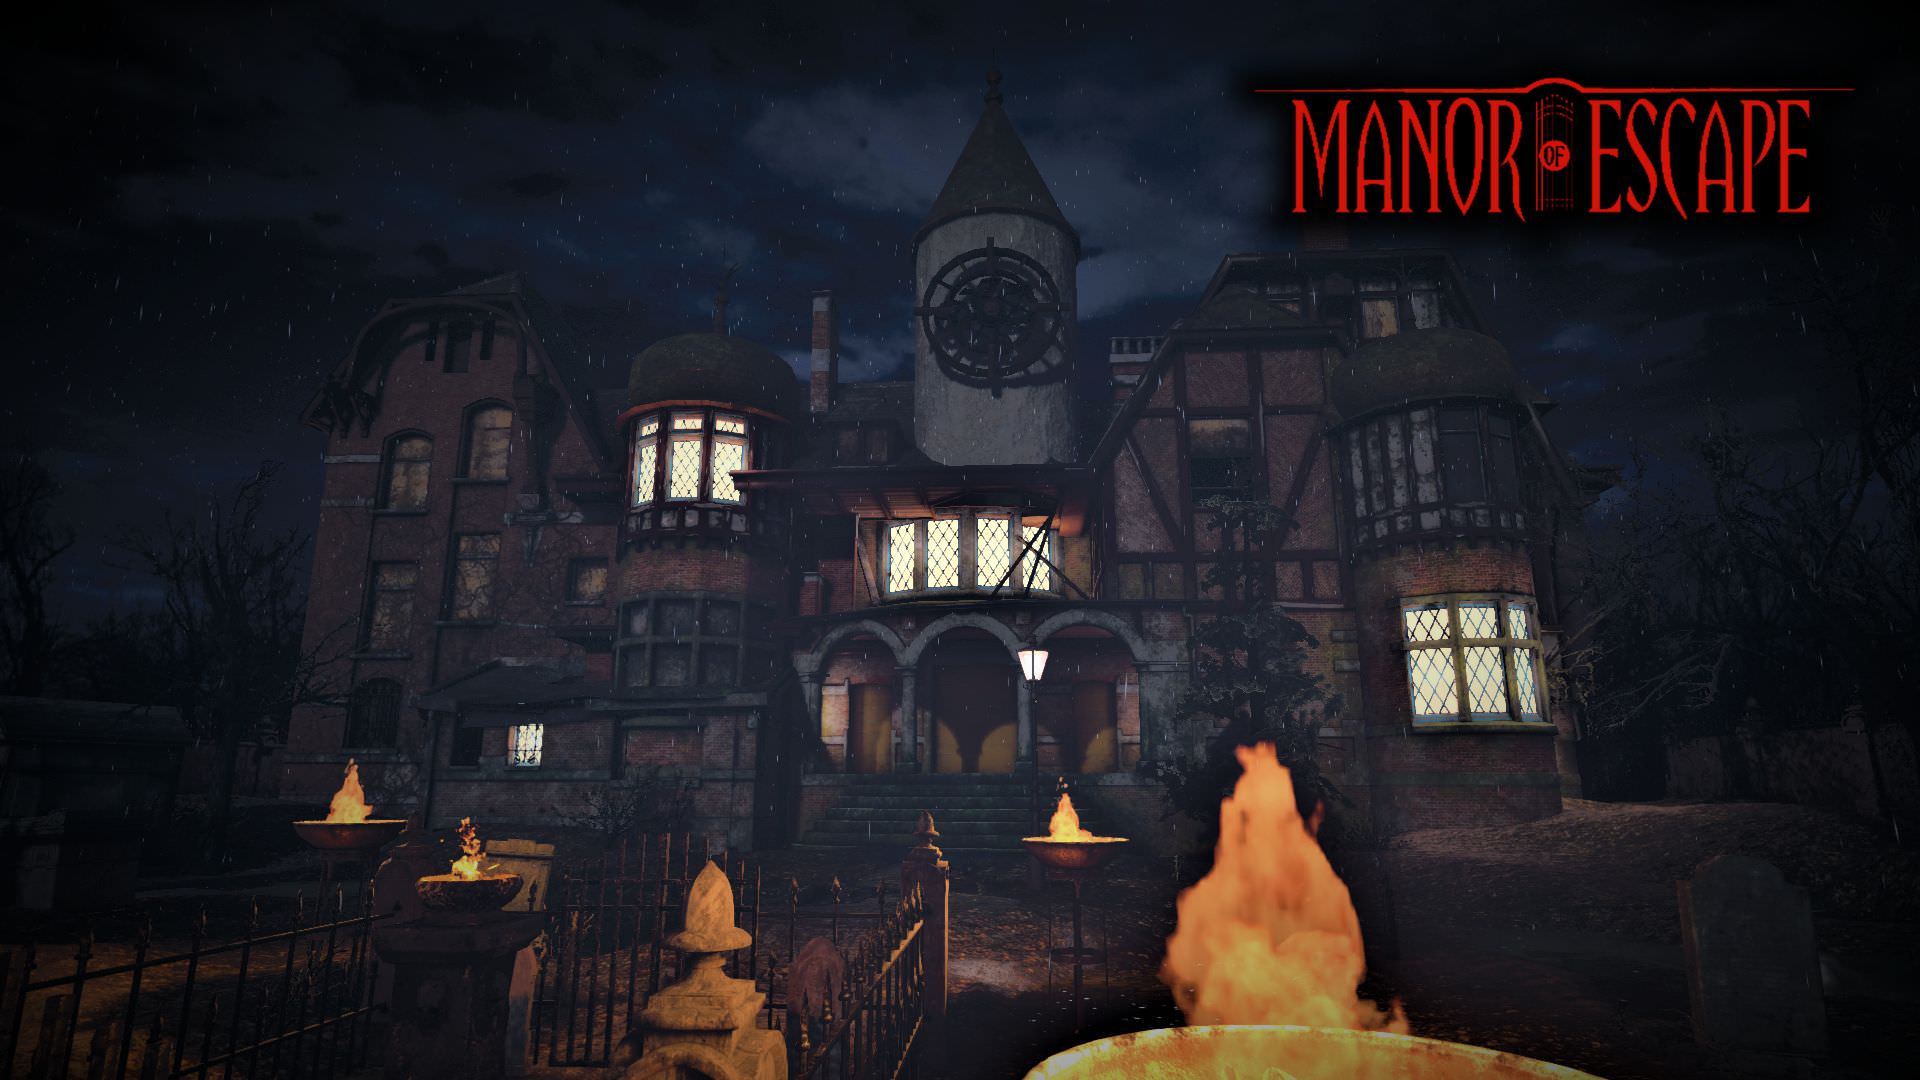 A virtual reality escape room in where players solve puzzles inside a manor and try to escape.